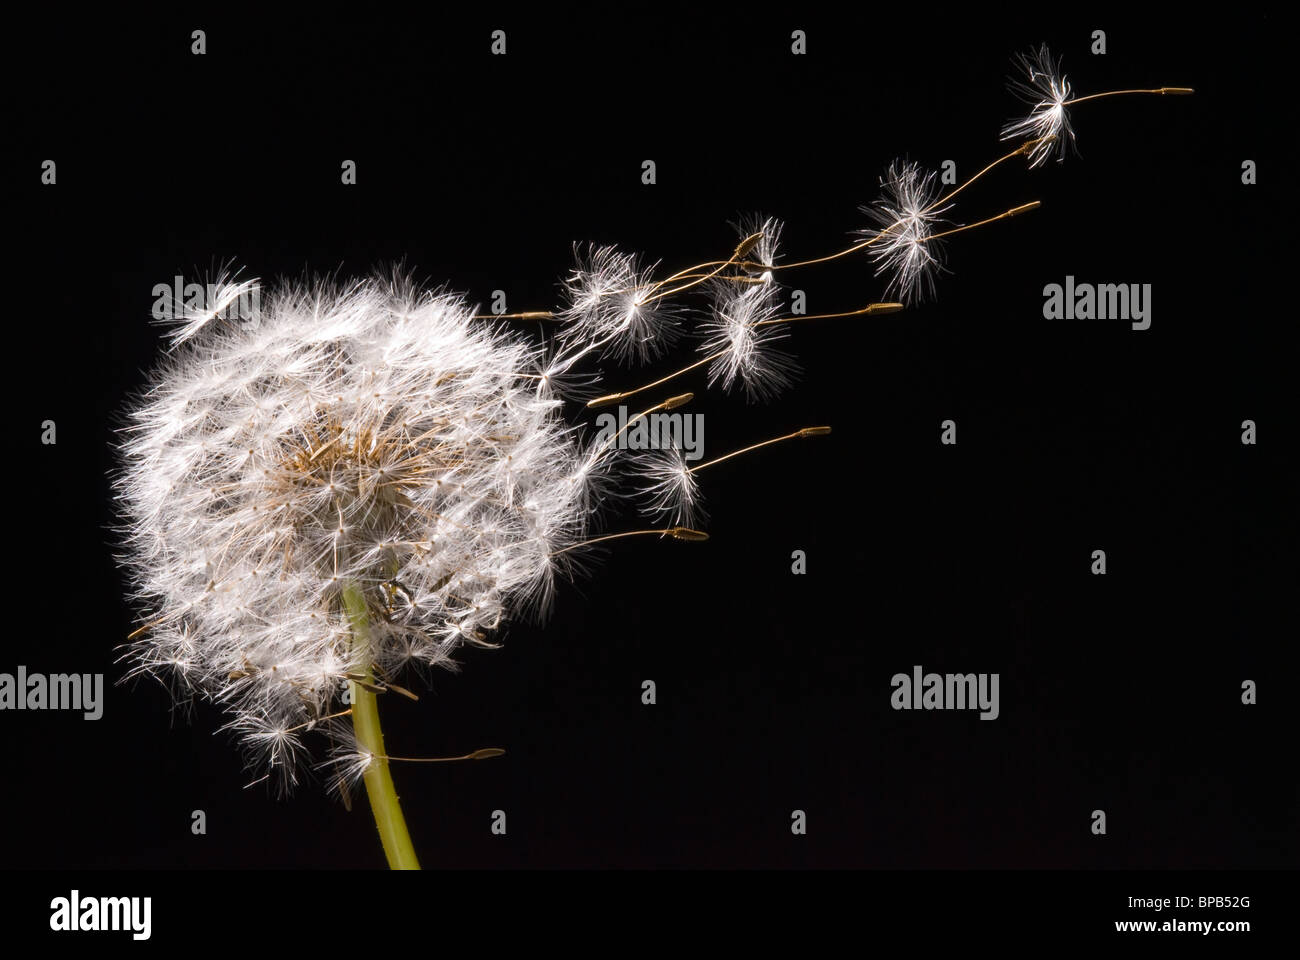 Seeds of dandelion are flying away. Stock Photo